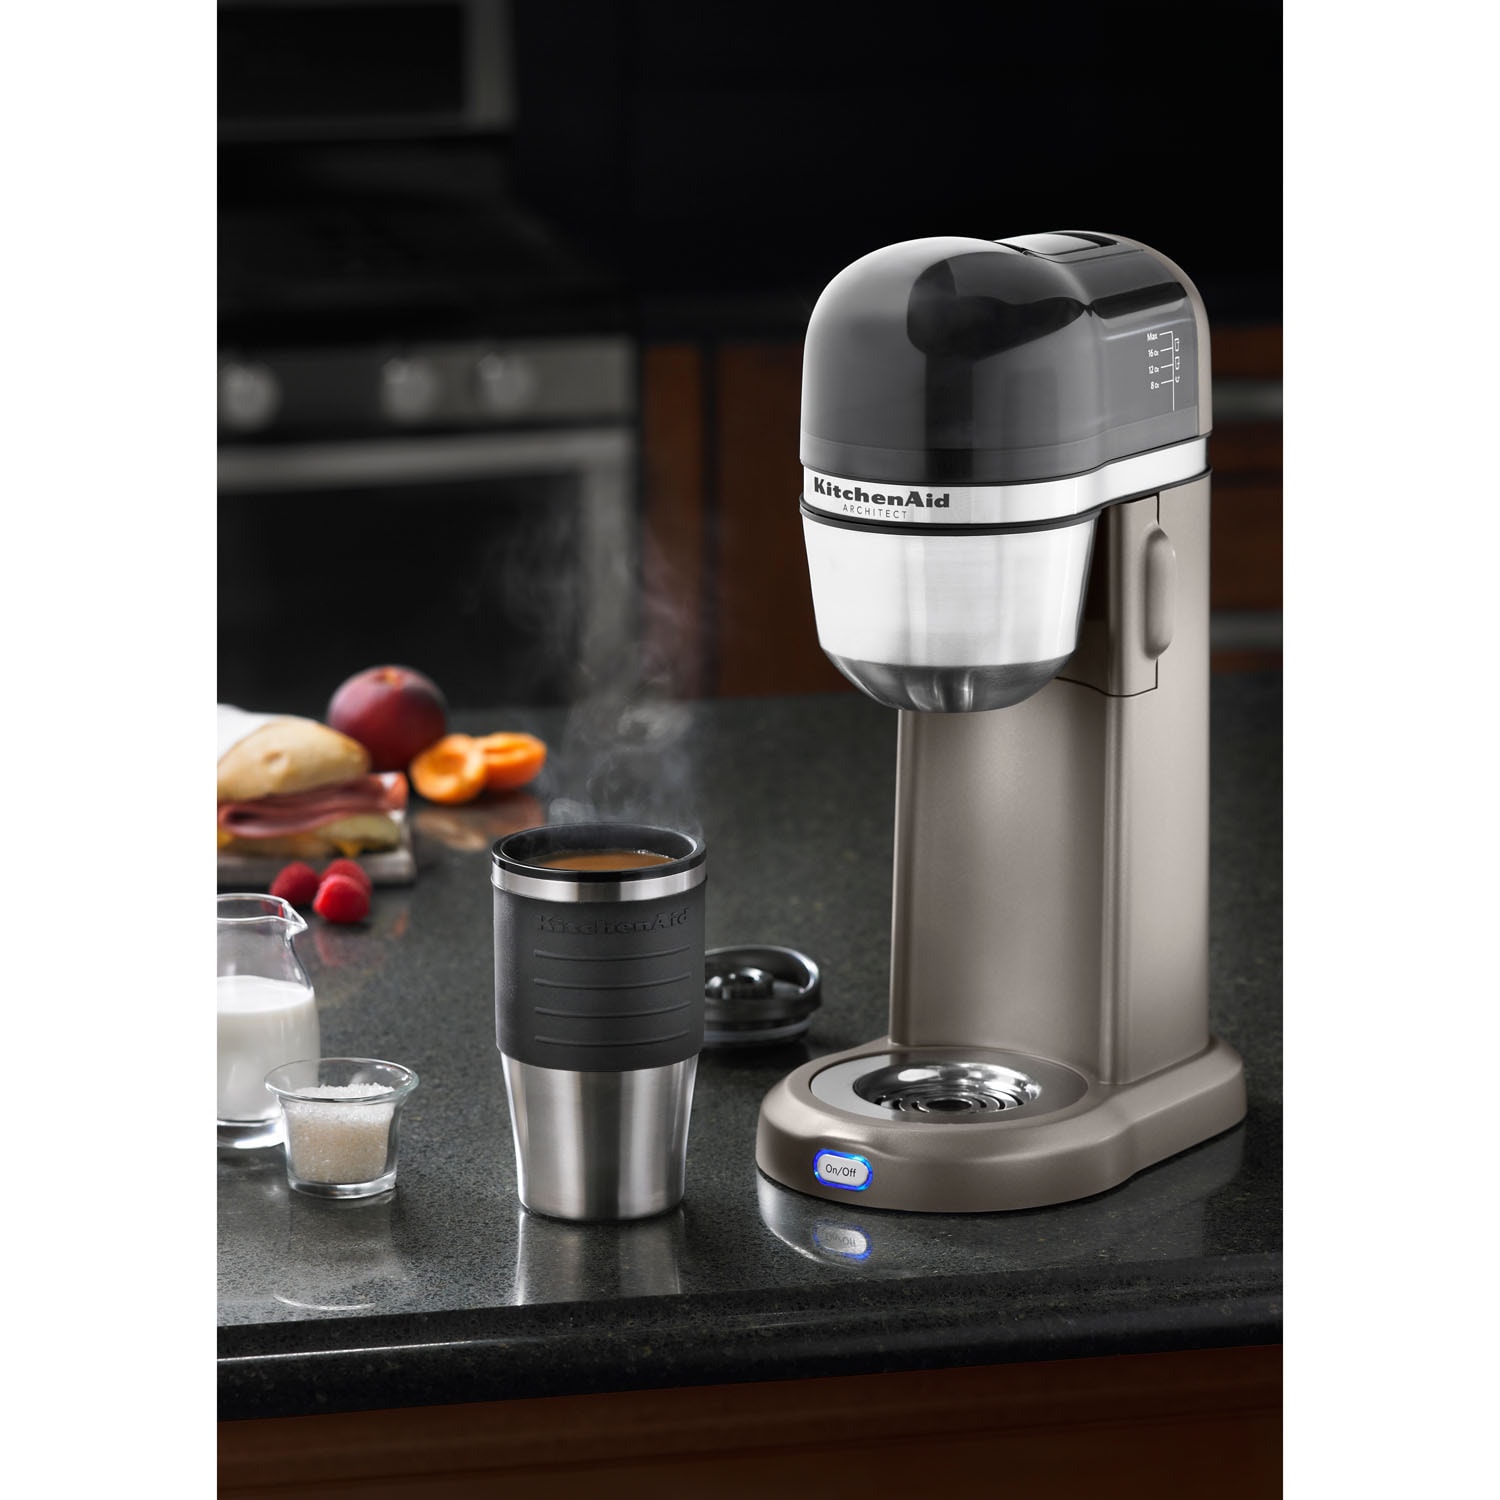 https://ak1.ostkcdn.com/images/products/11372008/KitchenAid-KCM0402ACS-4-Cup-Personal-Coffee-Maker-with-Multifunctional-Thermal-Mug-Cocoa-Silver-fee7e6ac-4178-4fe2-b7e4-37ffdc10ff7d.jpg